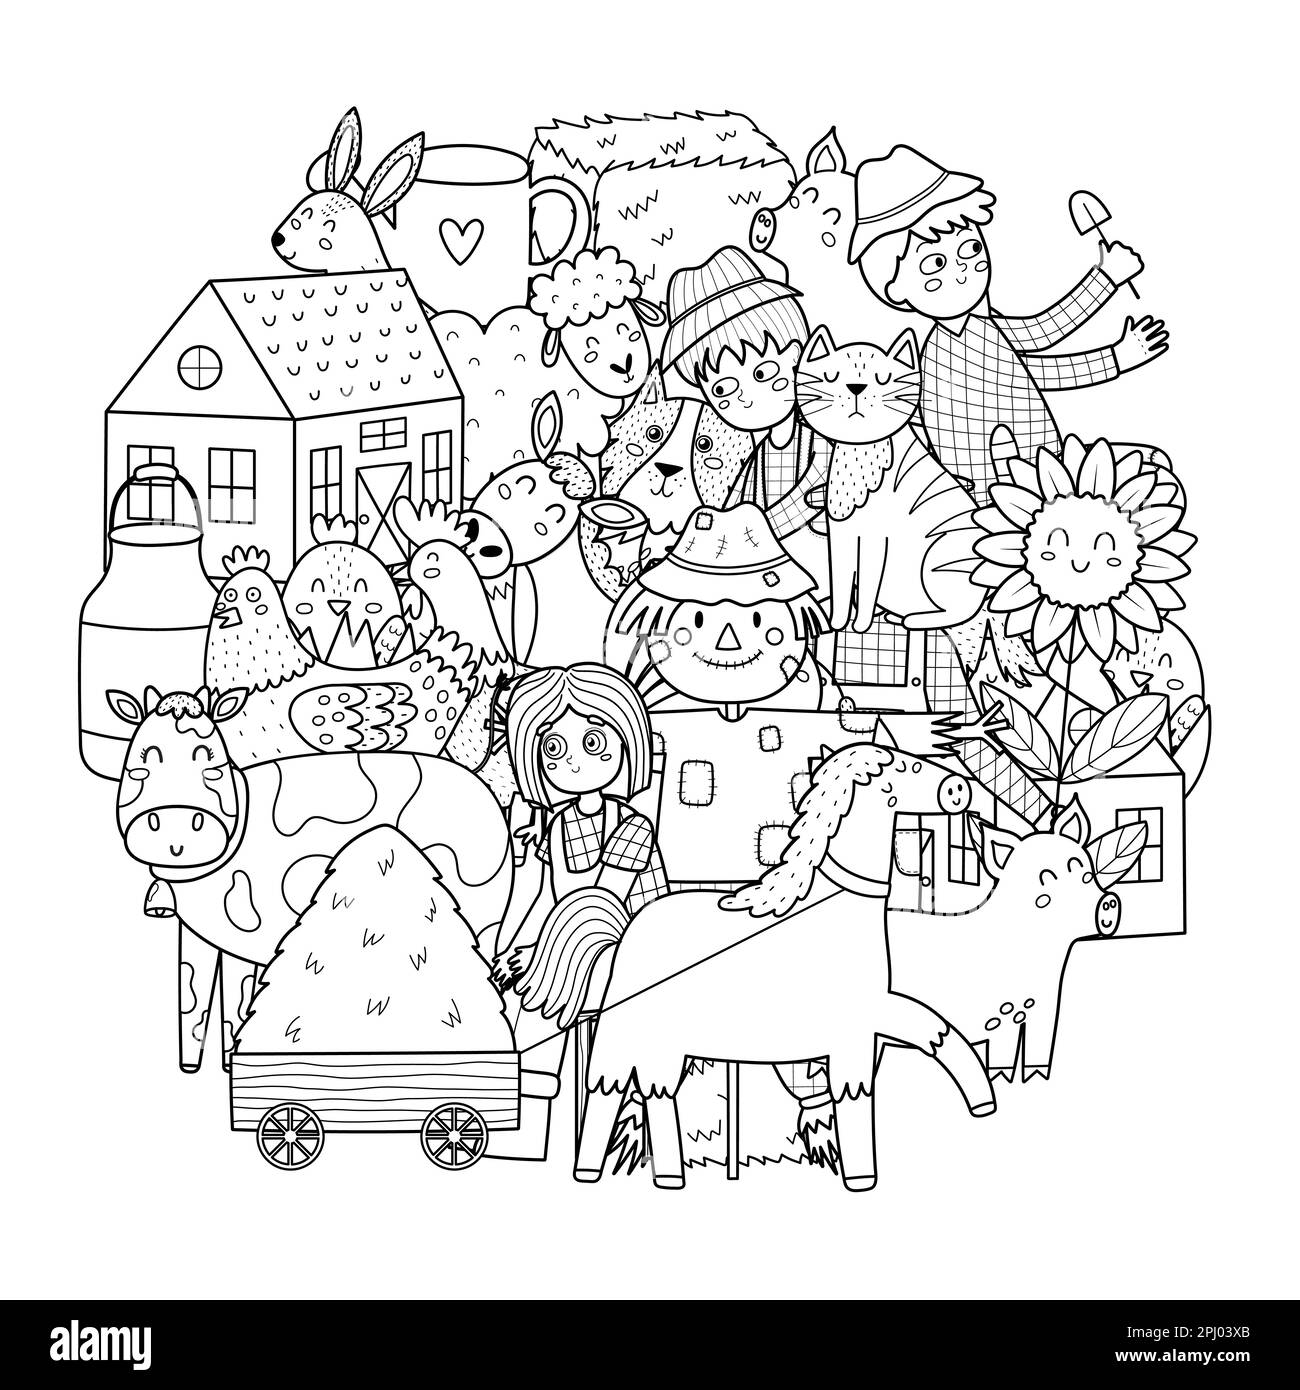 Cute farm characters circle shape coloring page. Doodle mandala with animals and farmers Stock Vector